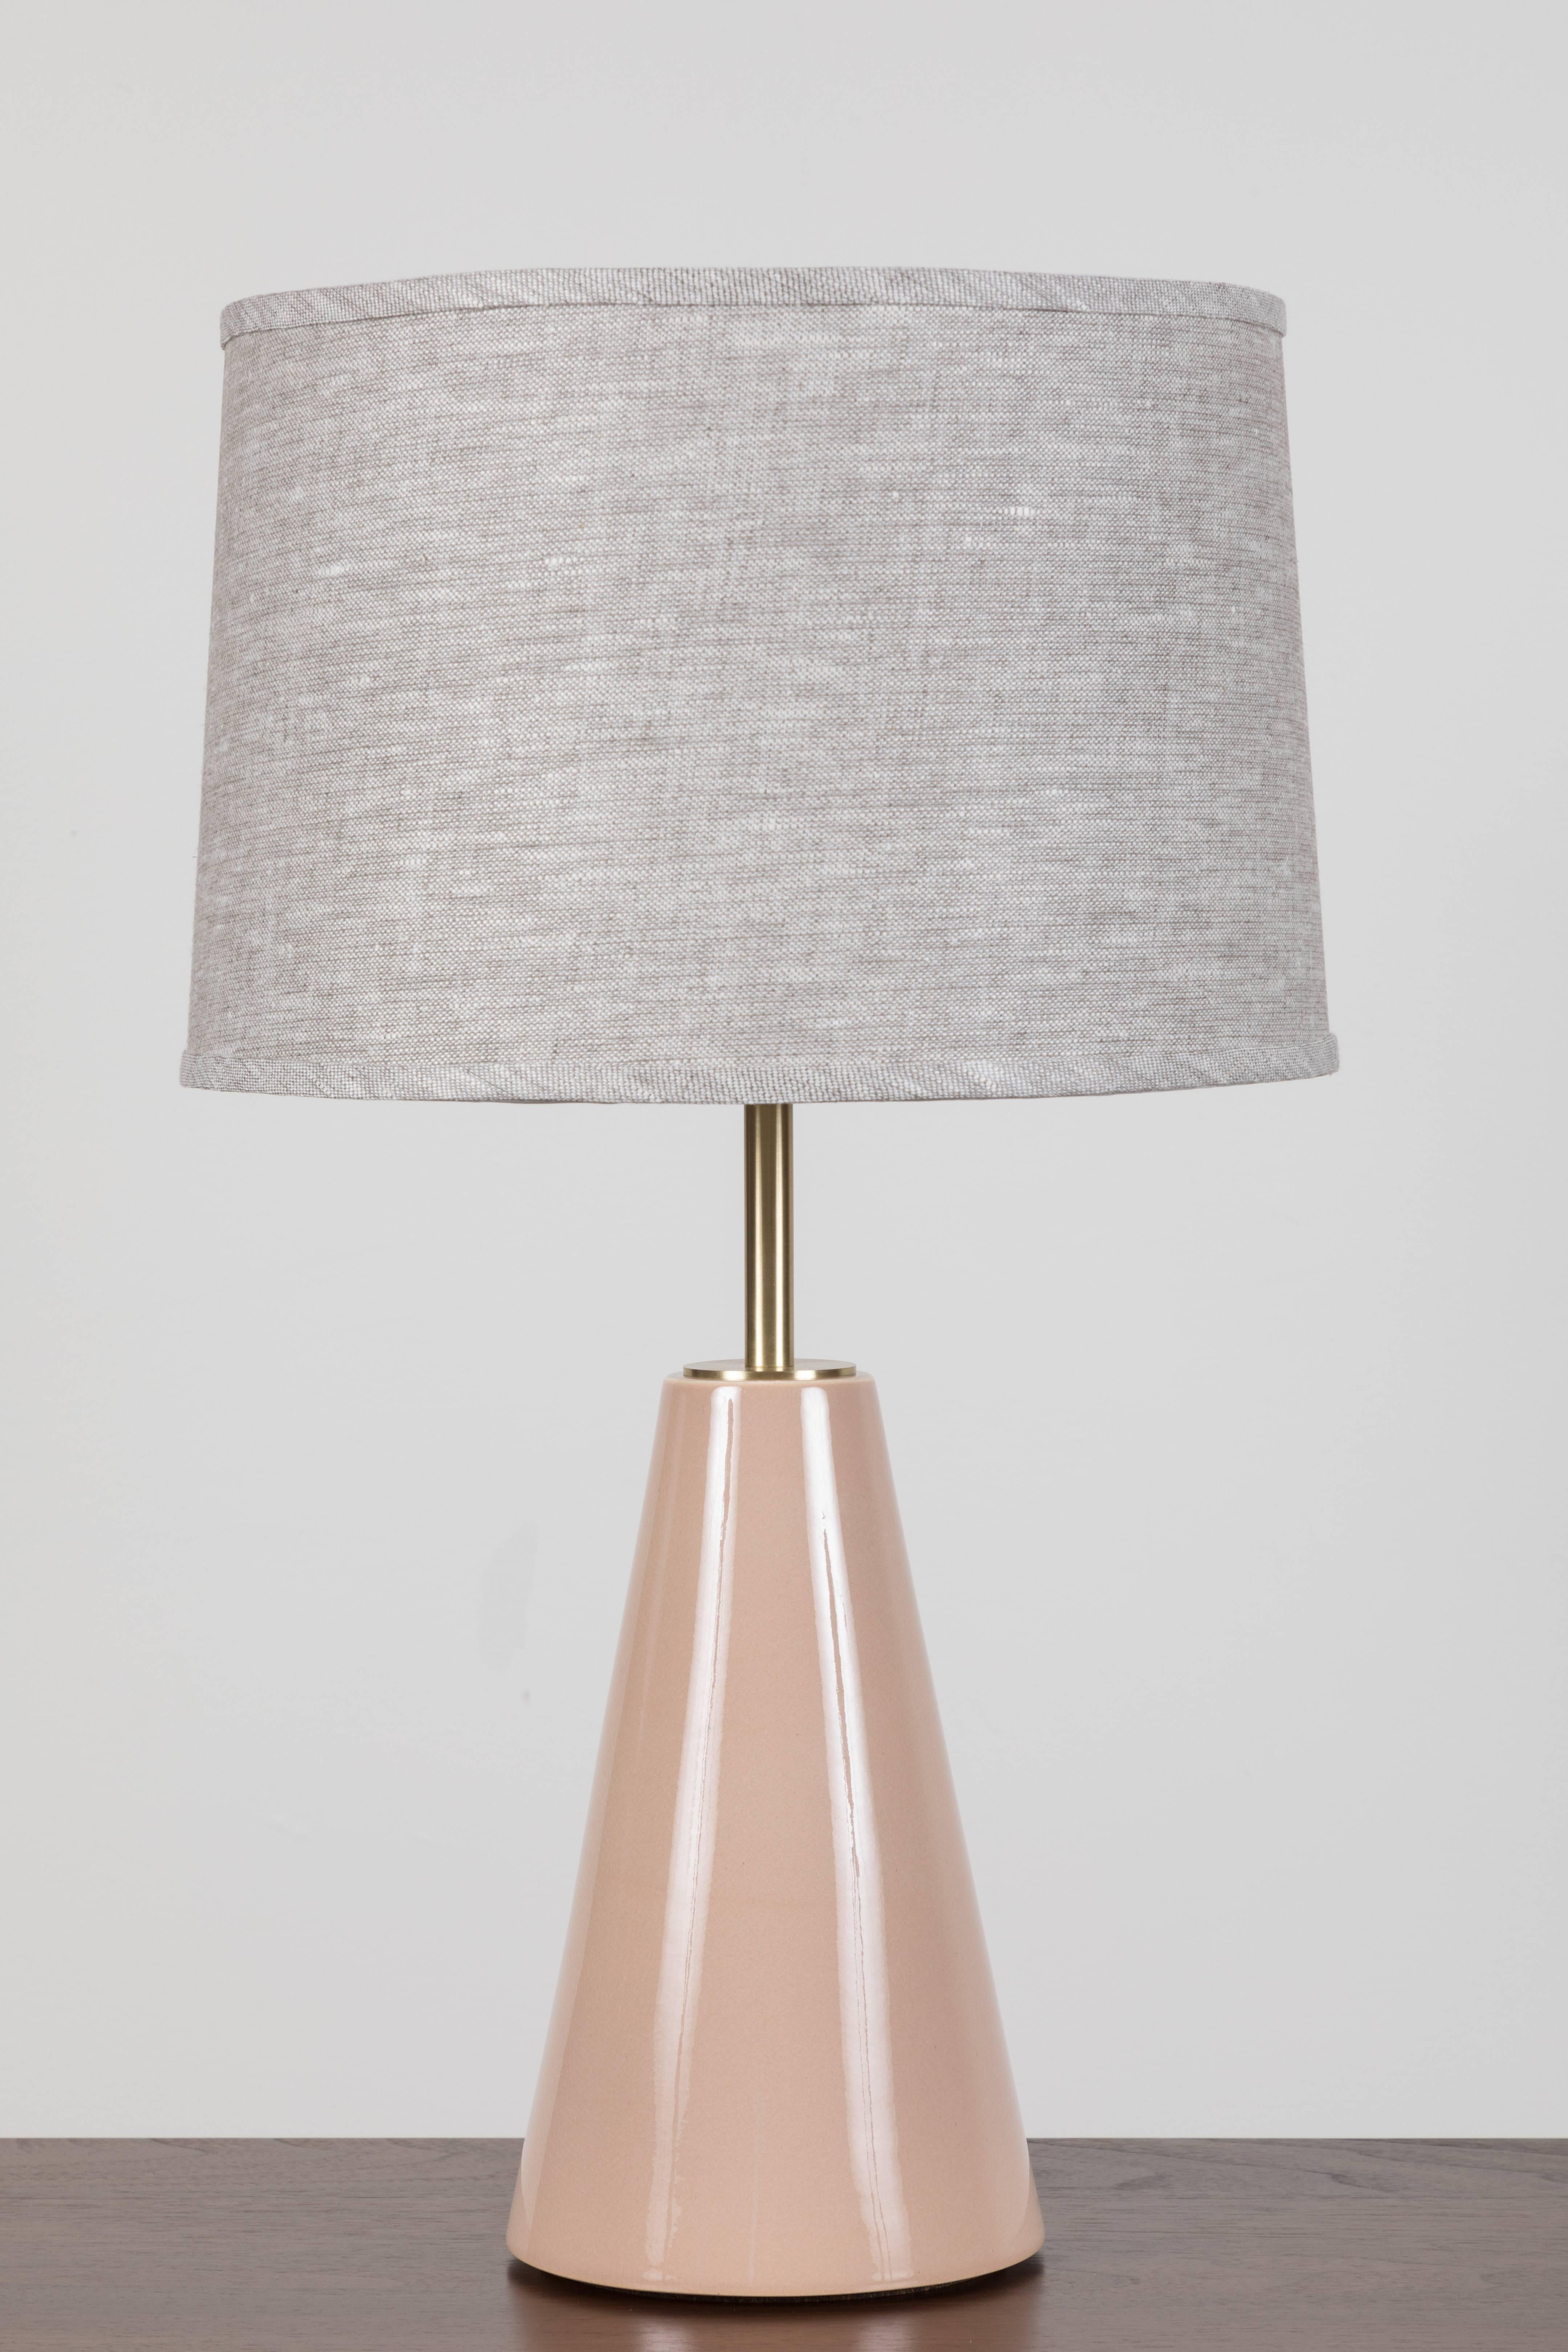 Pair of Gio lamps by Stone and Sawyer.